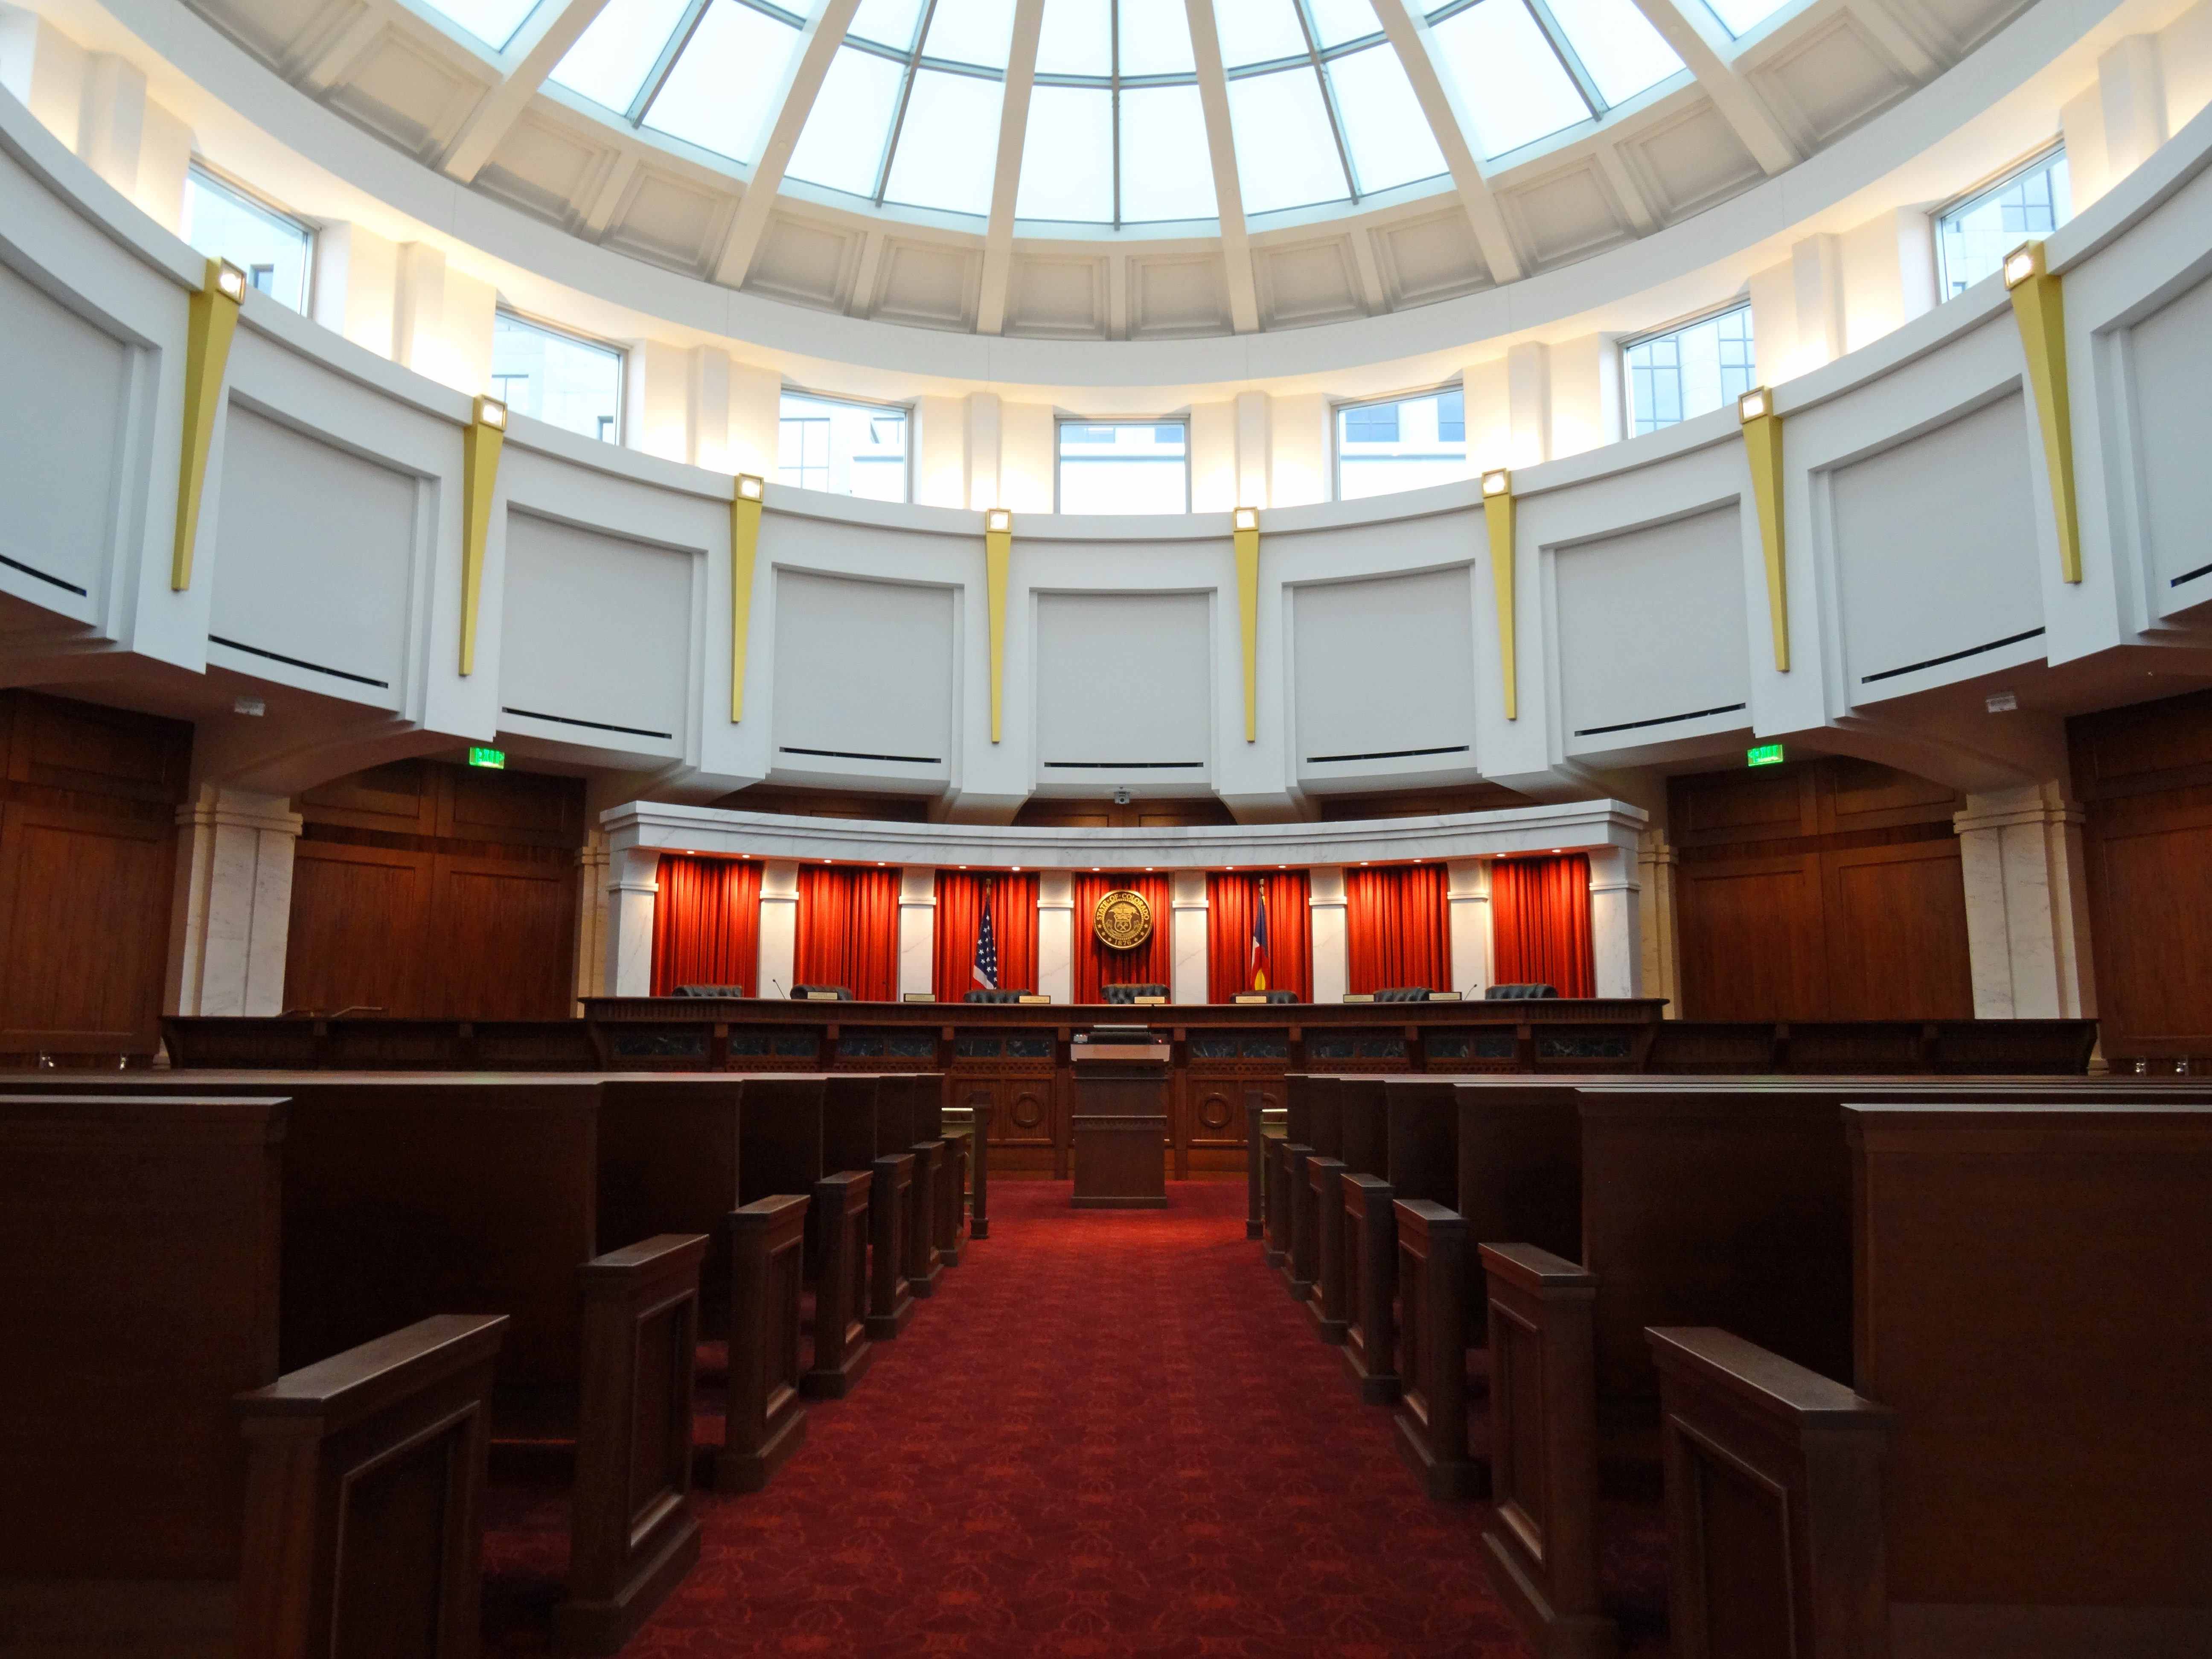 Photo of the inside of the Colorado Supreme Courtroom. The red-carpeted aisle passes by about 7 rows of dark wooden benches, as the Bench looms at the back of the room. There are 7 sets of red curtains against a white cabinet, and in the center set of red curtains hangs the seal of the State of Colorado. The round room is circled by a white balcony with gold trim, and the ceiling is a set of windows creating a large circular ceiling of glass.